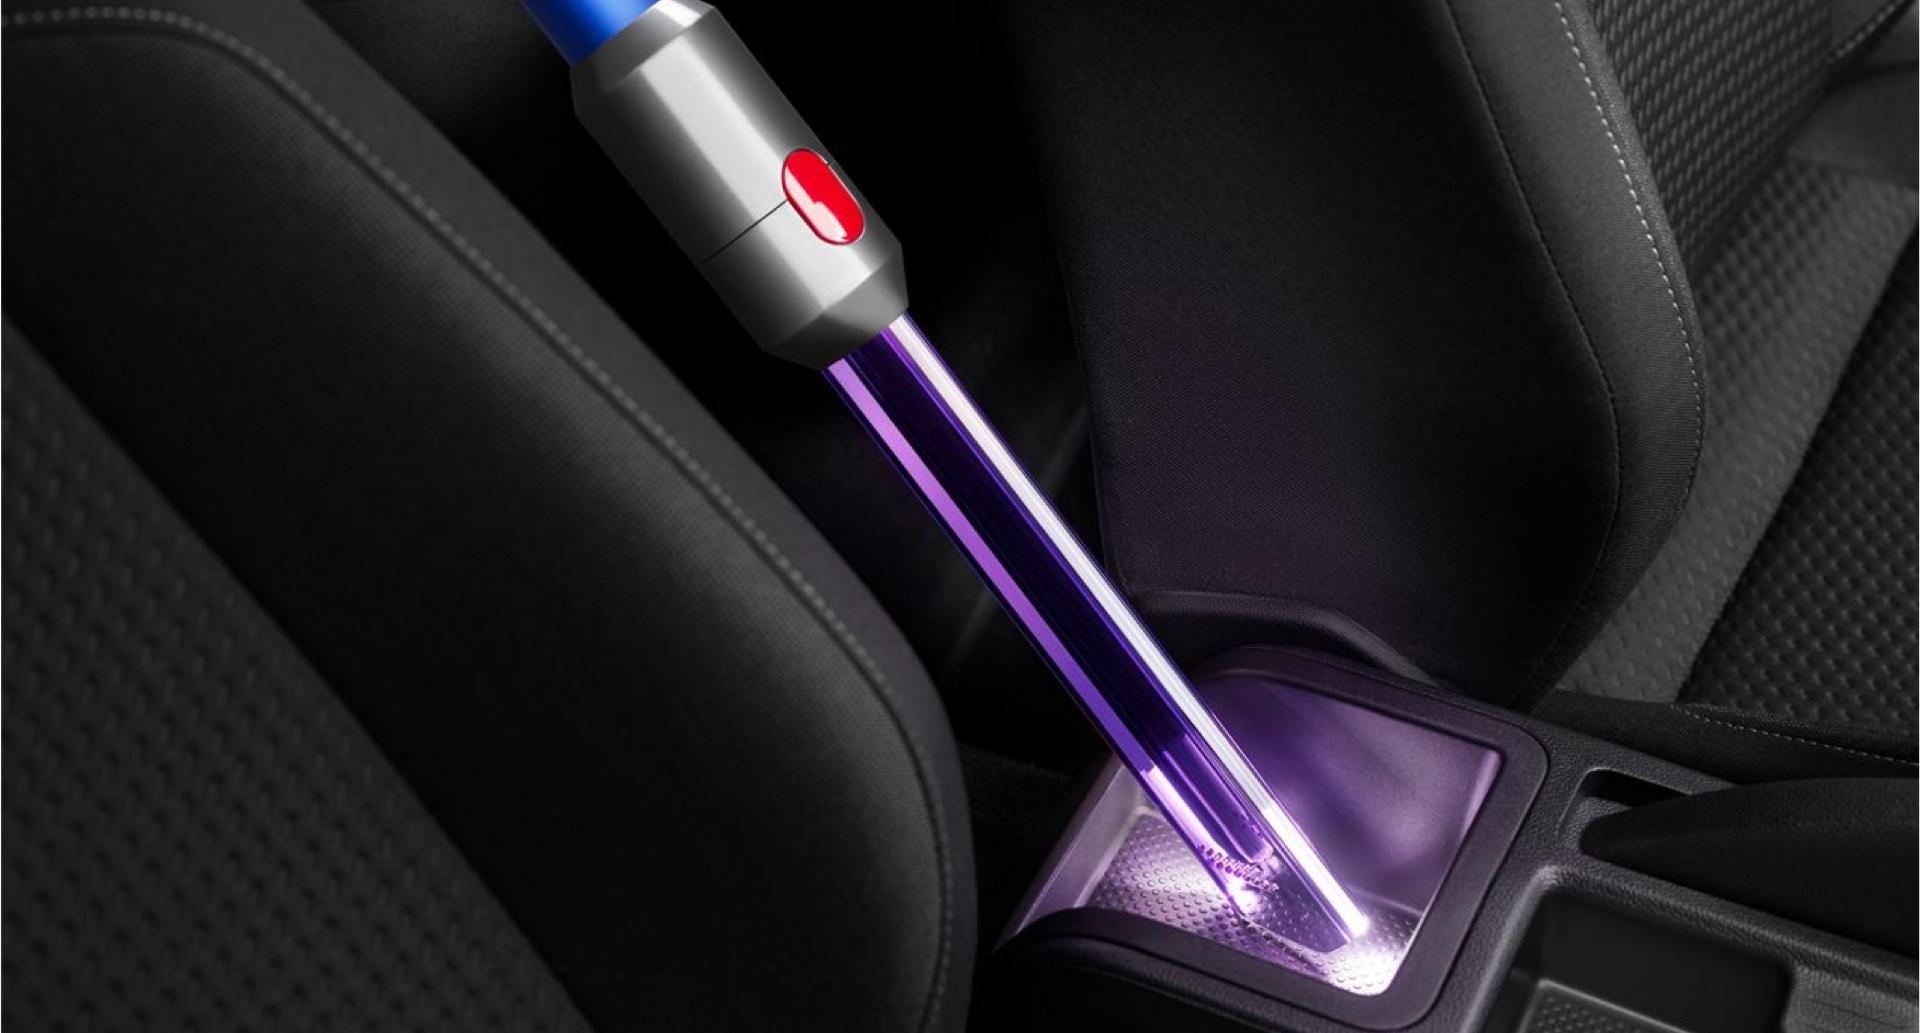 Dyson Light-pipe crevice tool cleaning a car